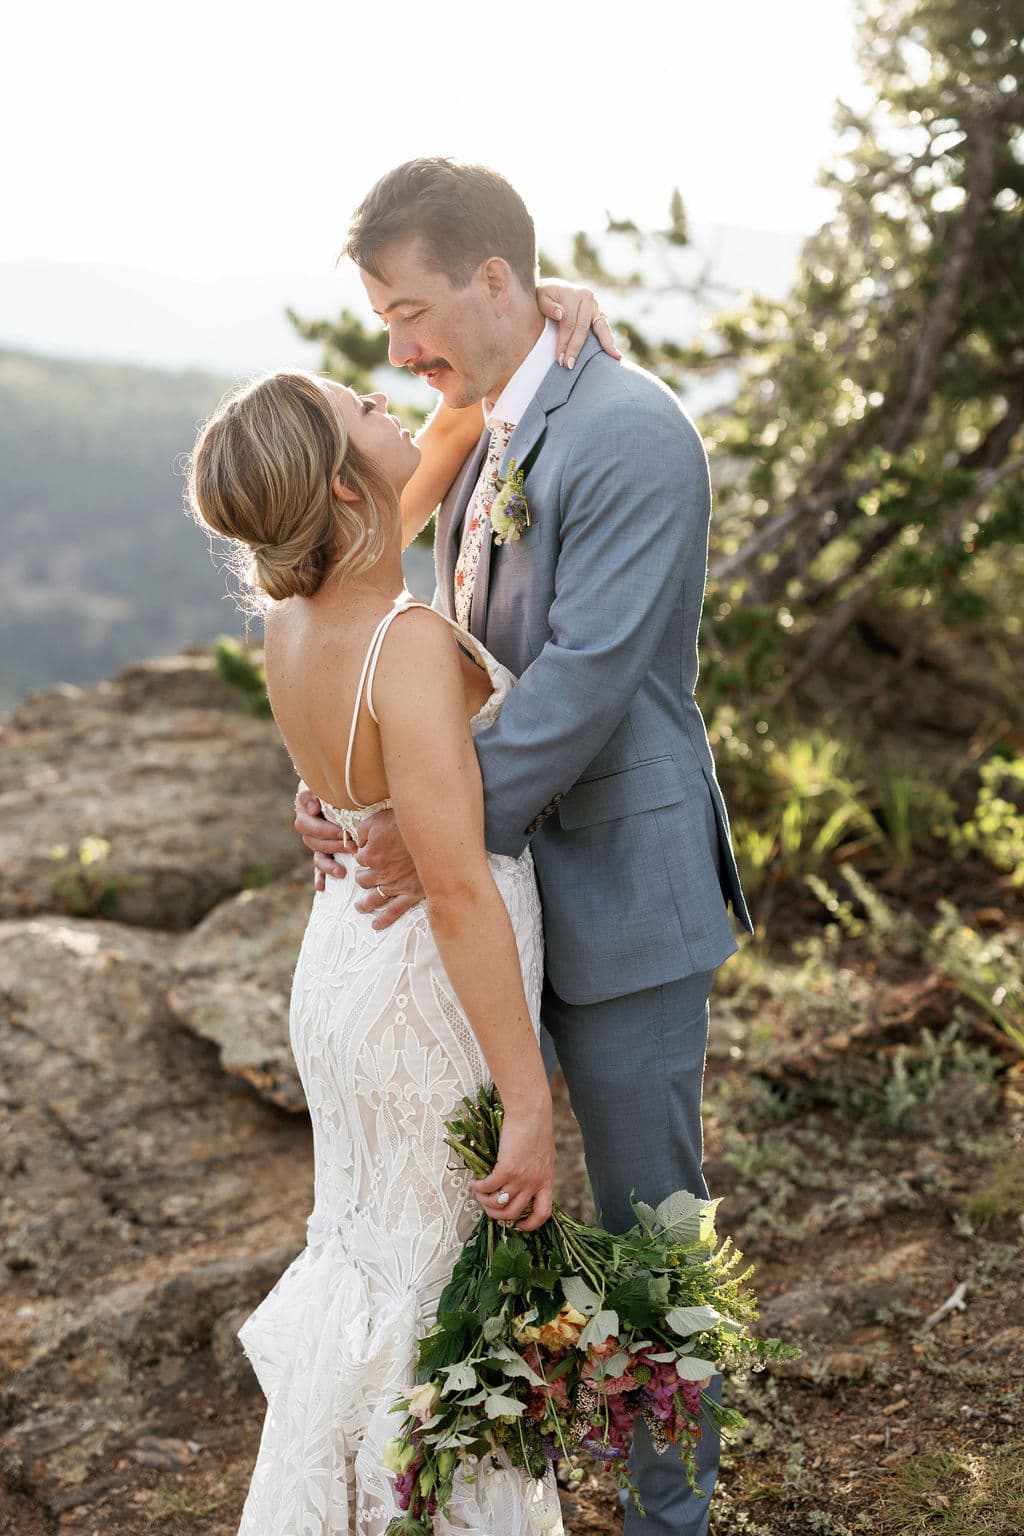 Sunset portraits at North Star Gatherings Wedding in Idaho Springs